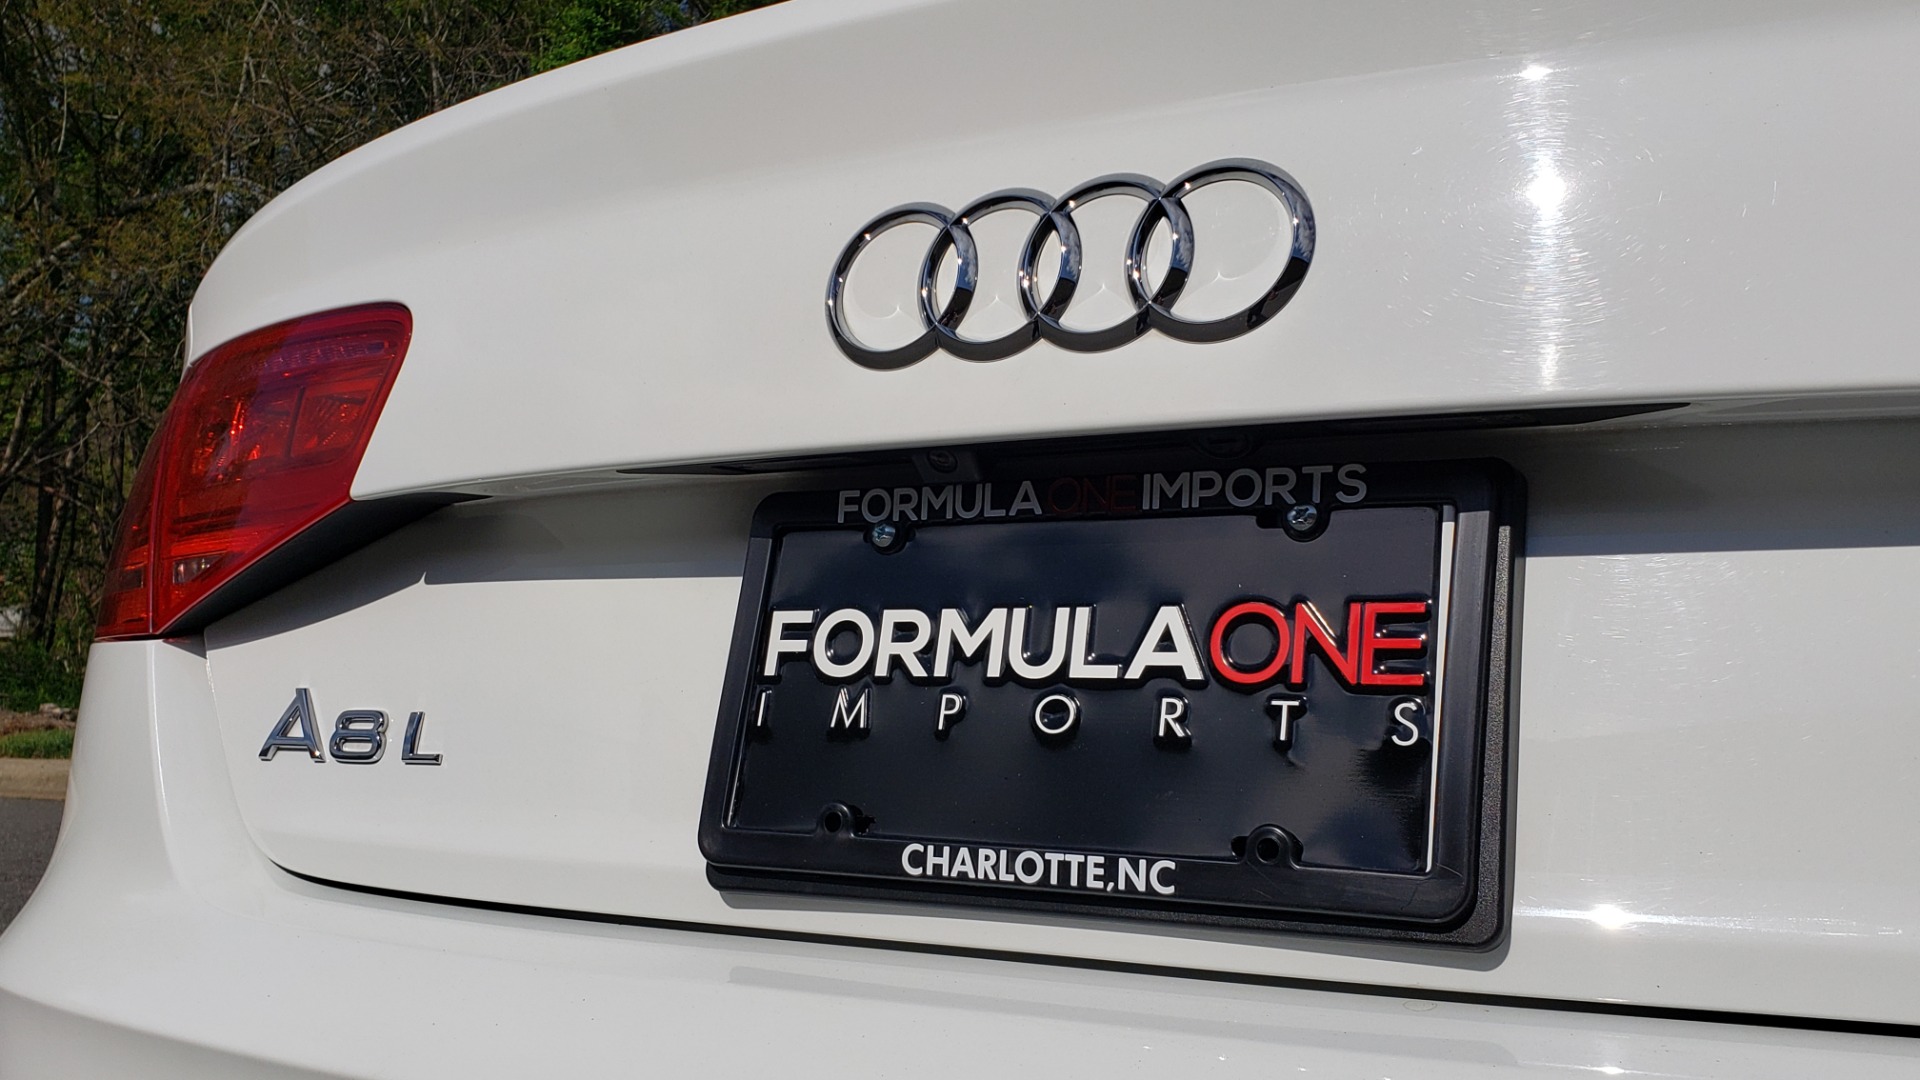 Used 2011 Audi A8 L QUATTRO / NAV / PANO-ROOF / REARVIEW / BSM / B&O SND for sale Sold at Formula Imports in Charlotte NC 28227 31